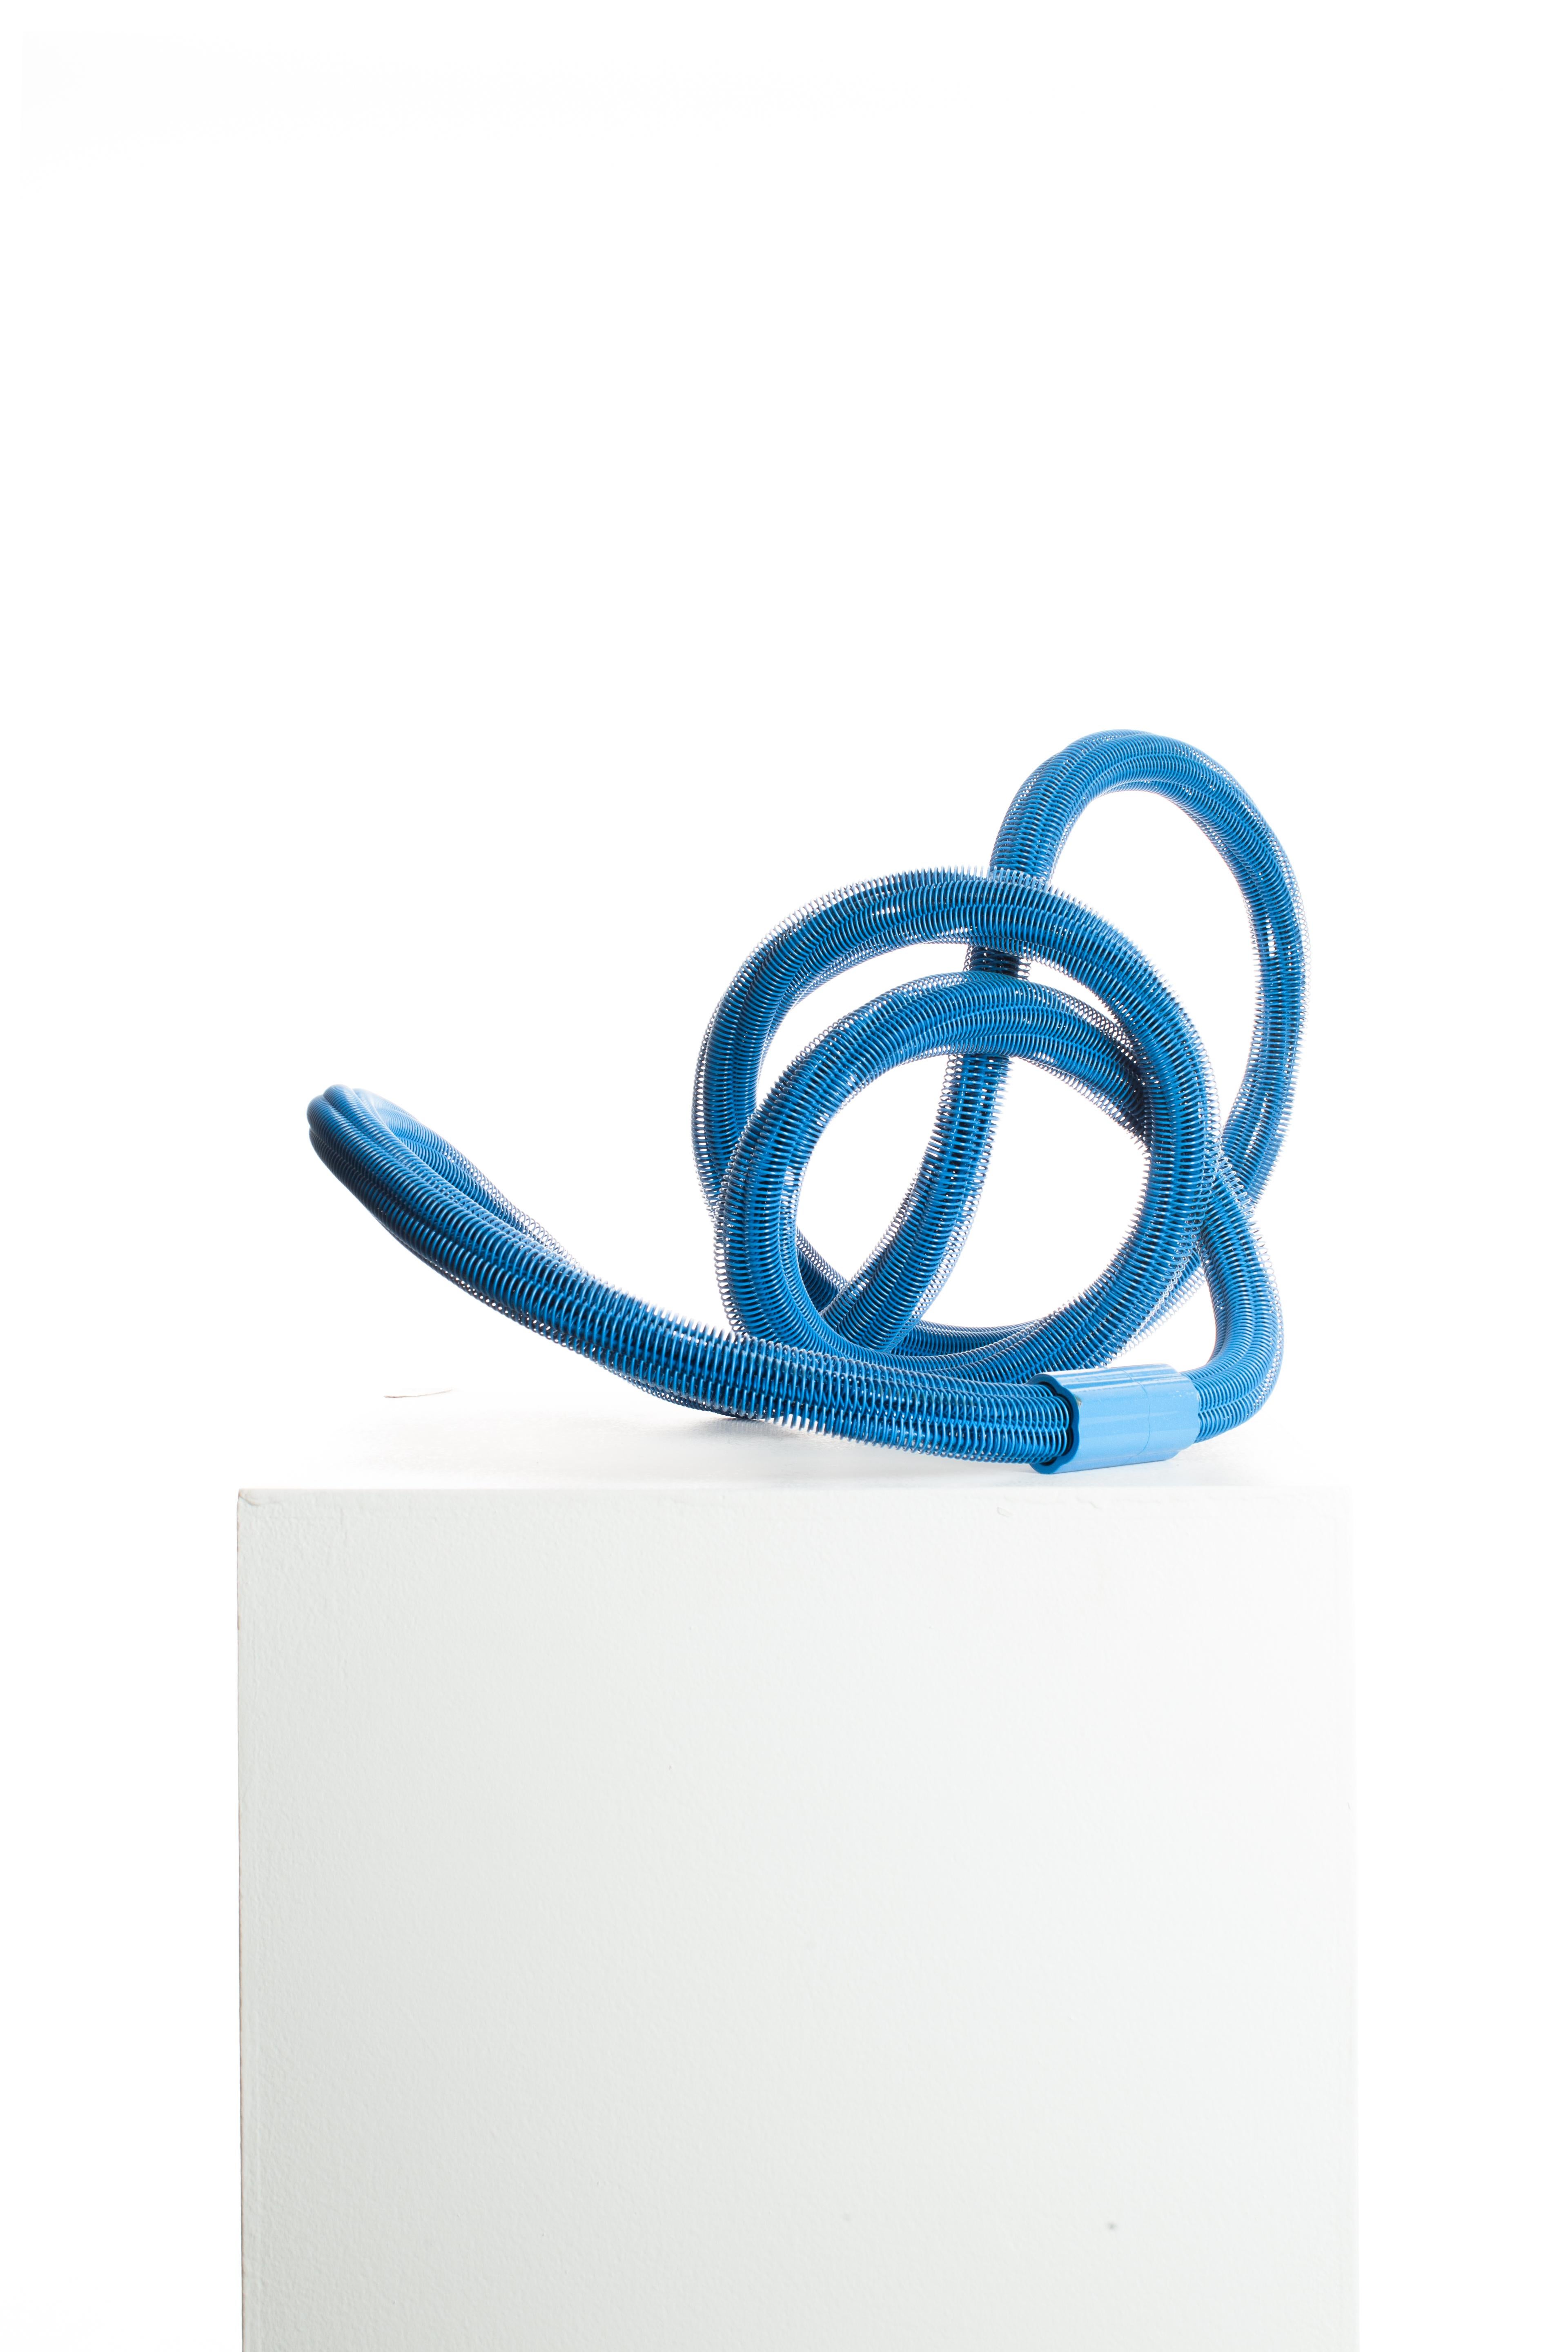 Blue, Powder Coating, Wire, Steel, Abstract, Contemporary, Modern, Sculpture For Sale 2